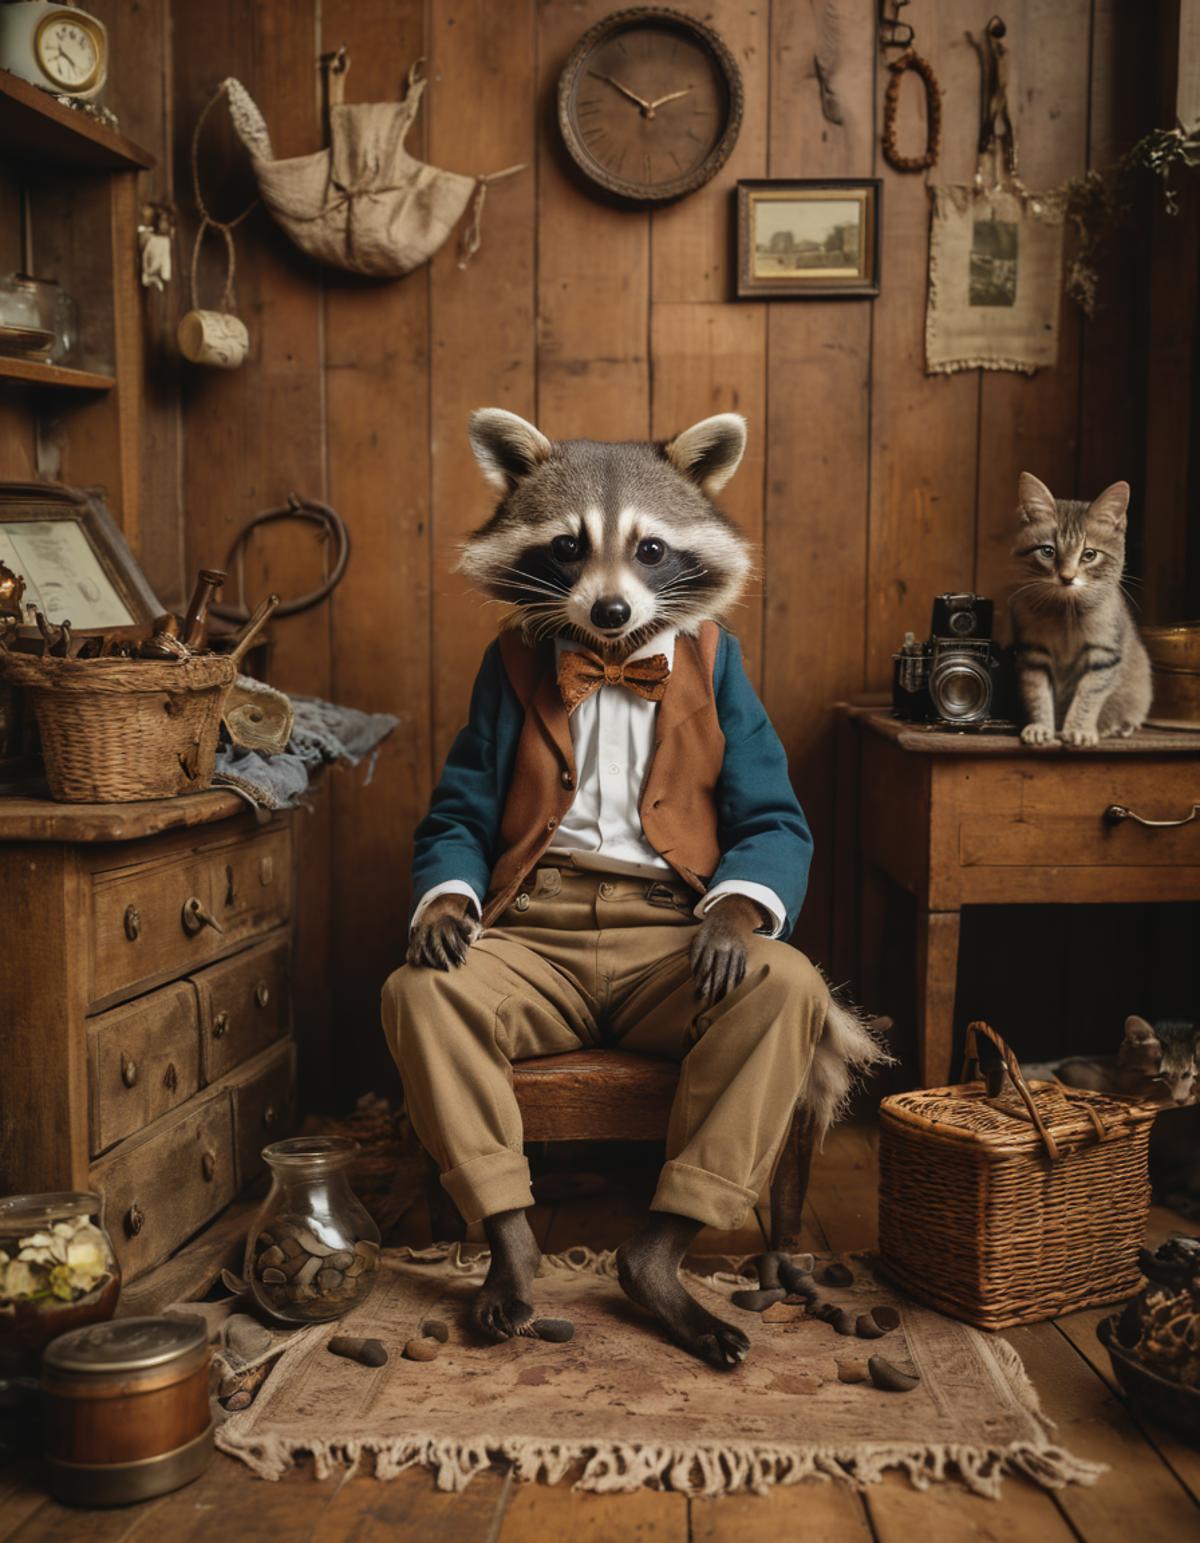 A raccoon wearing a suit and bow tie sitting on a wooden chair.